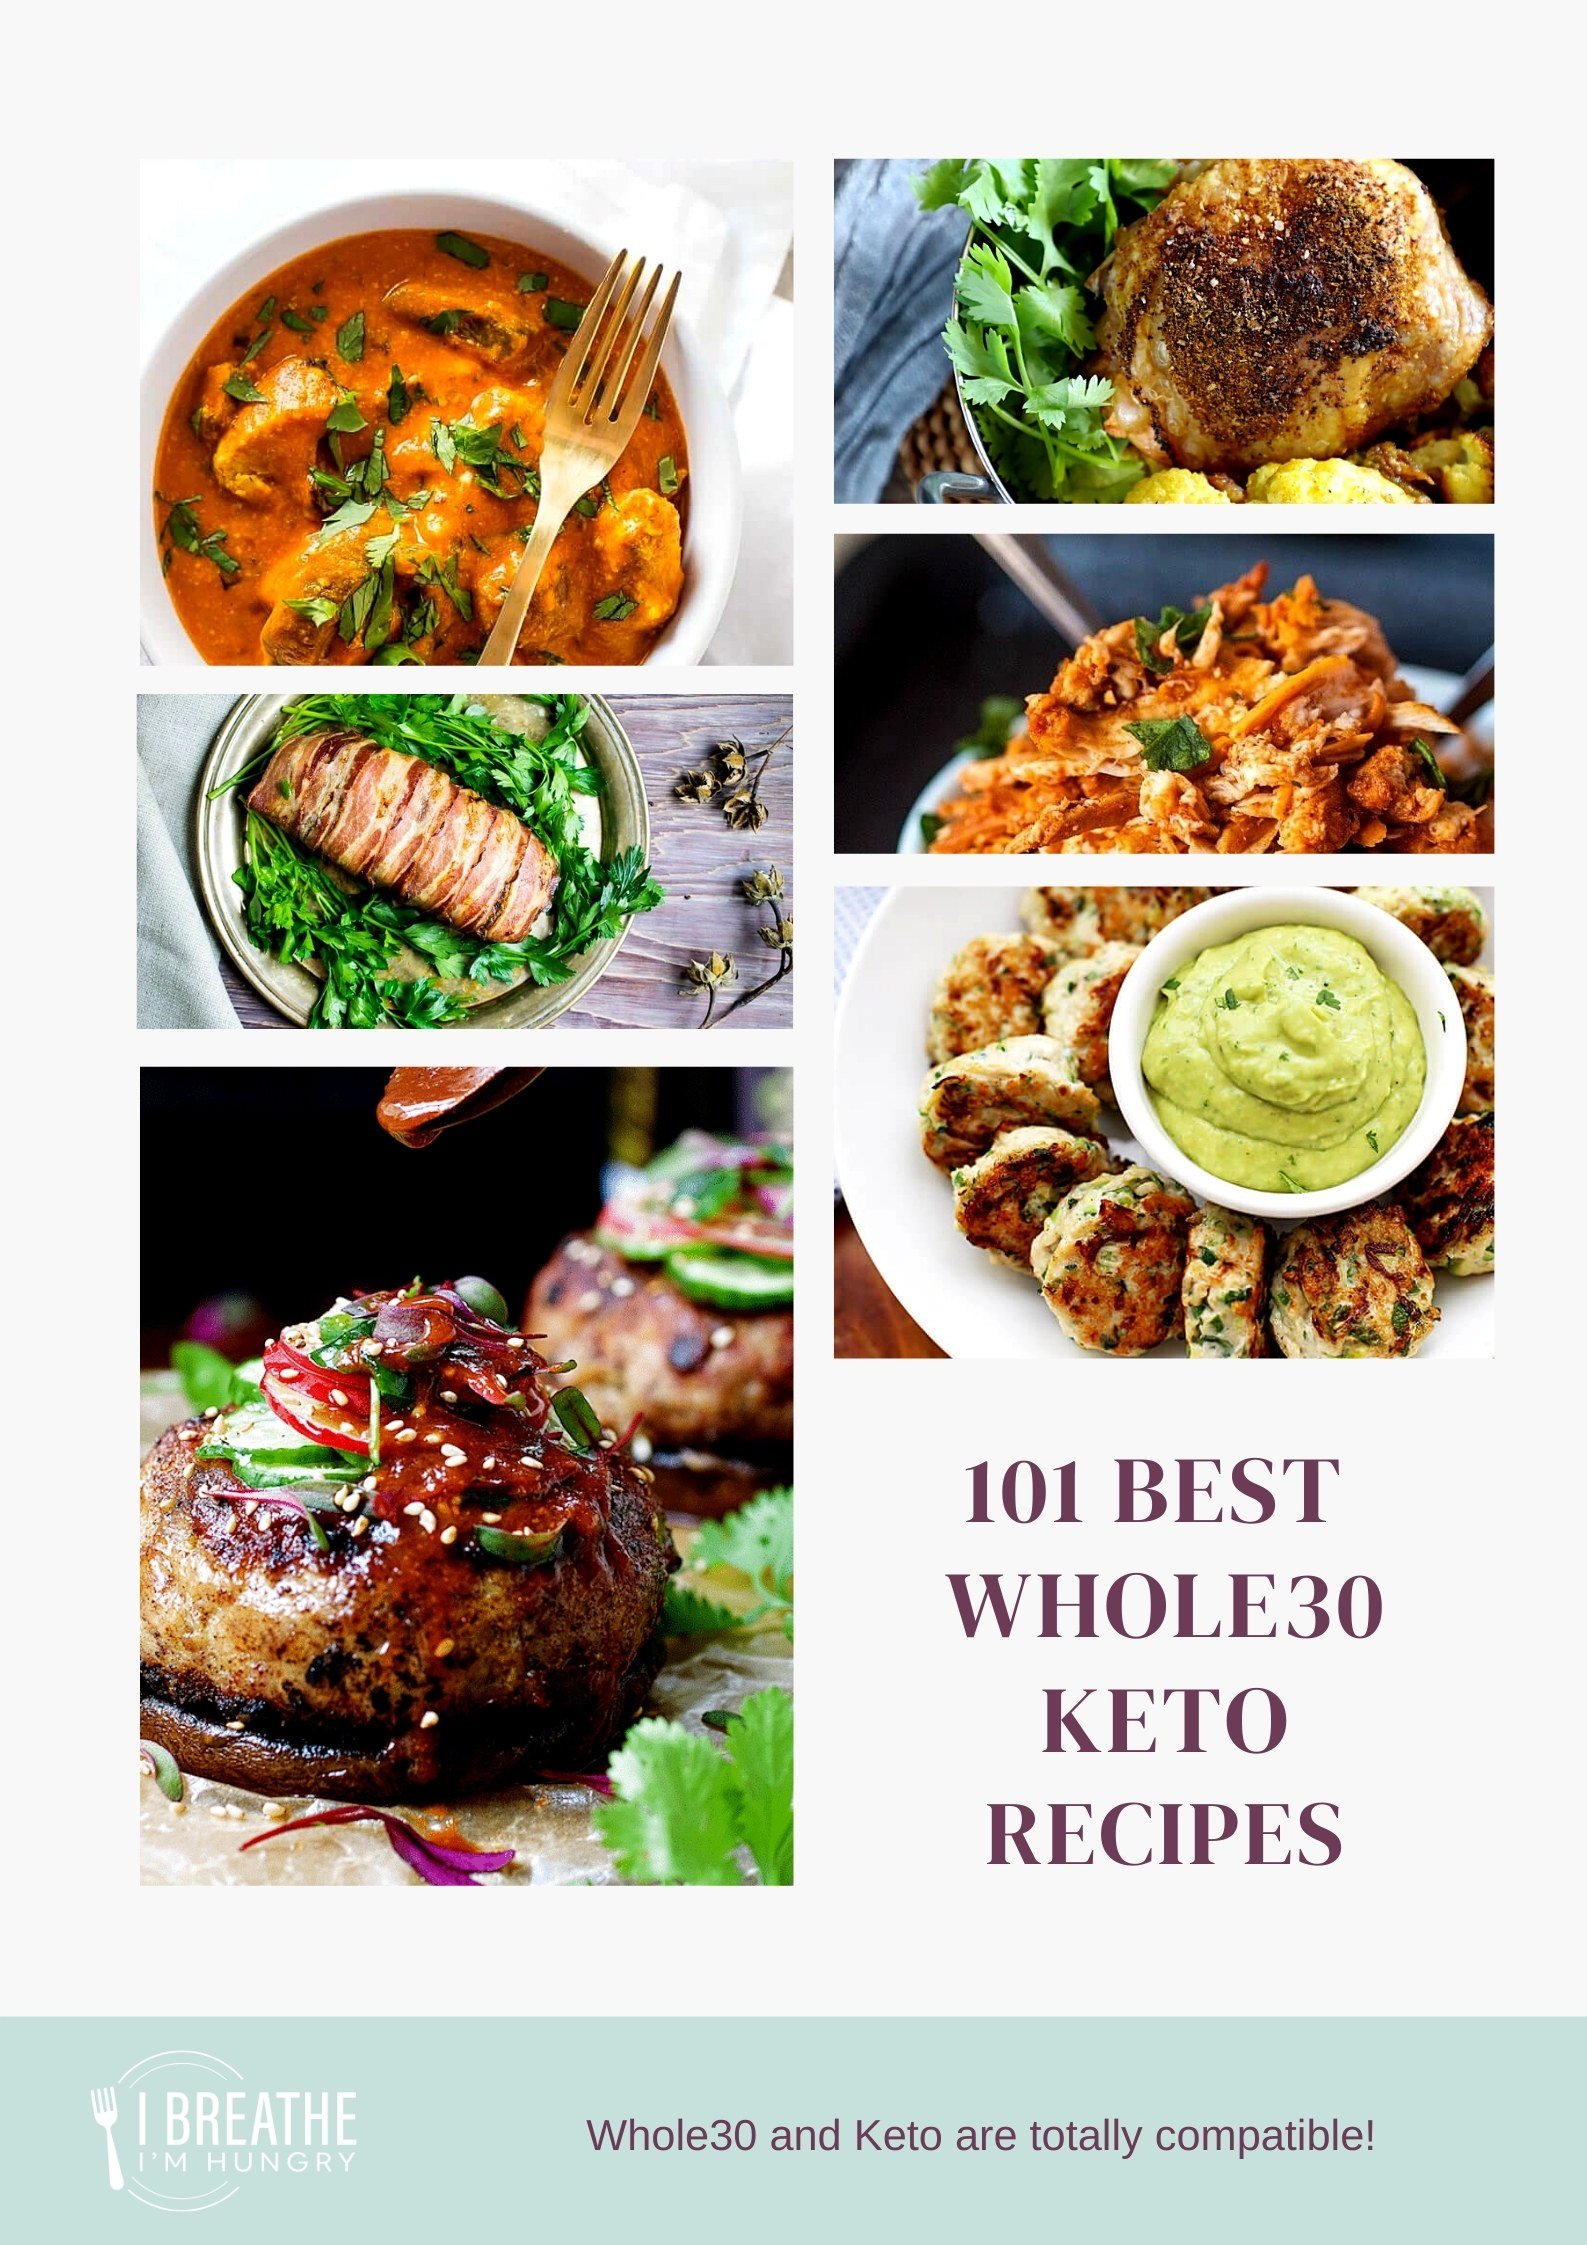 Best Whole30 Keto Recipes Graphic Poster